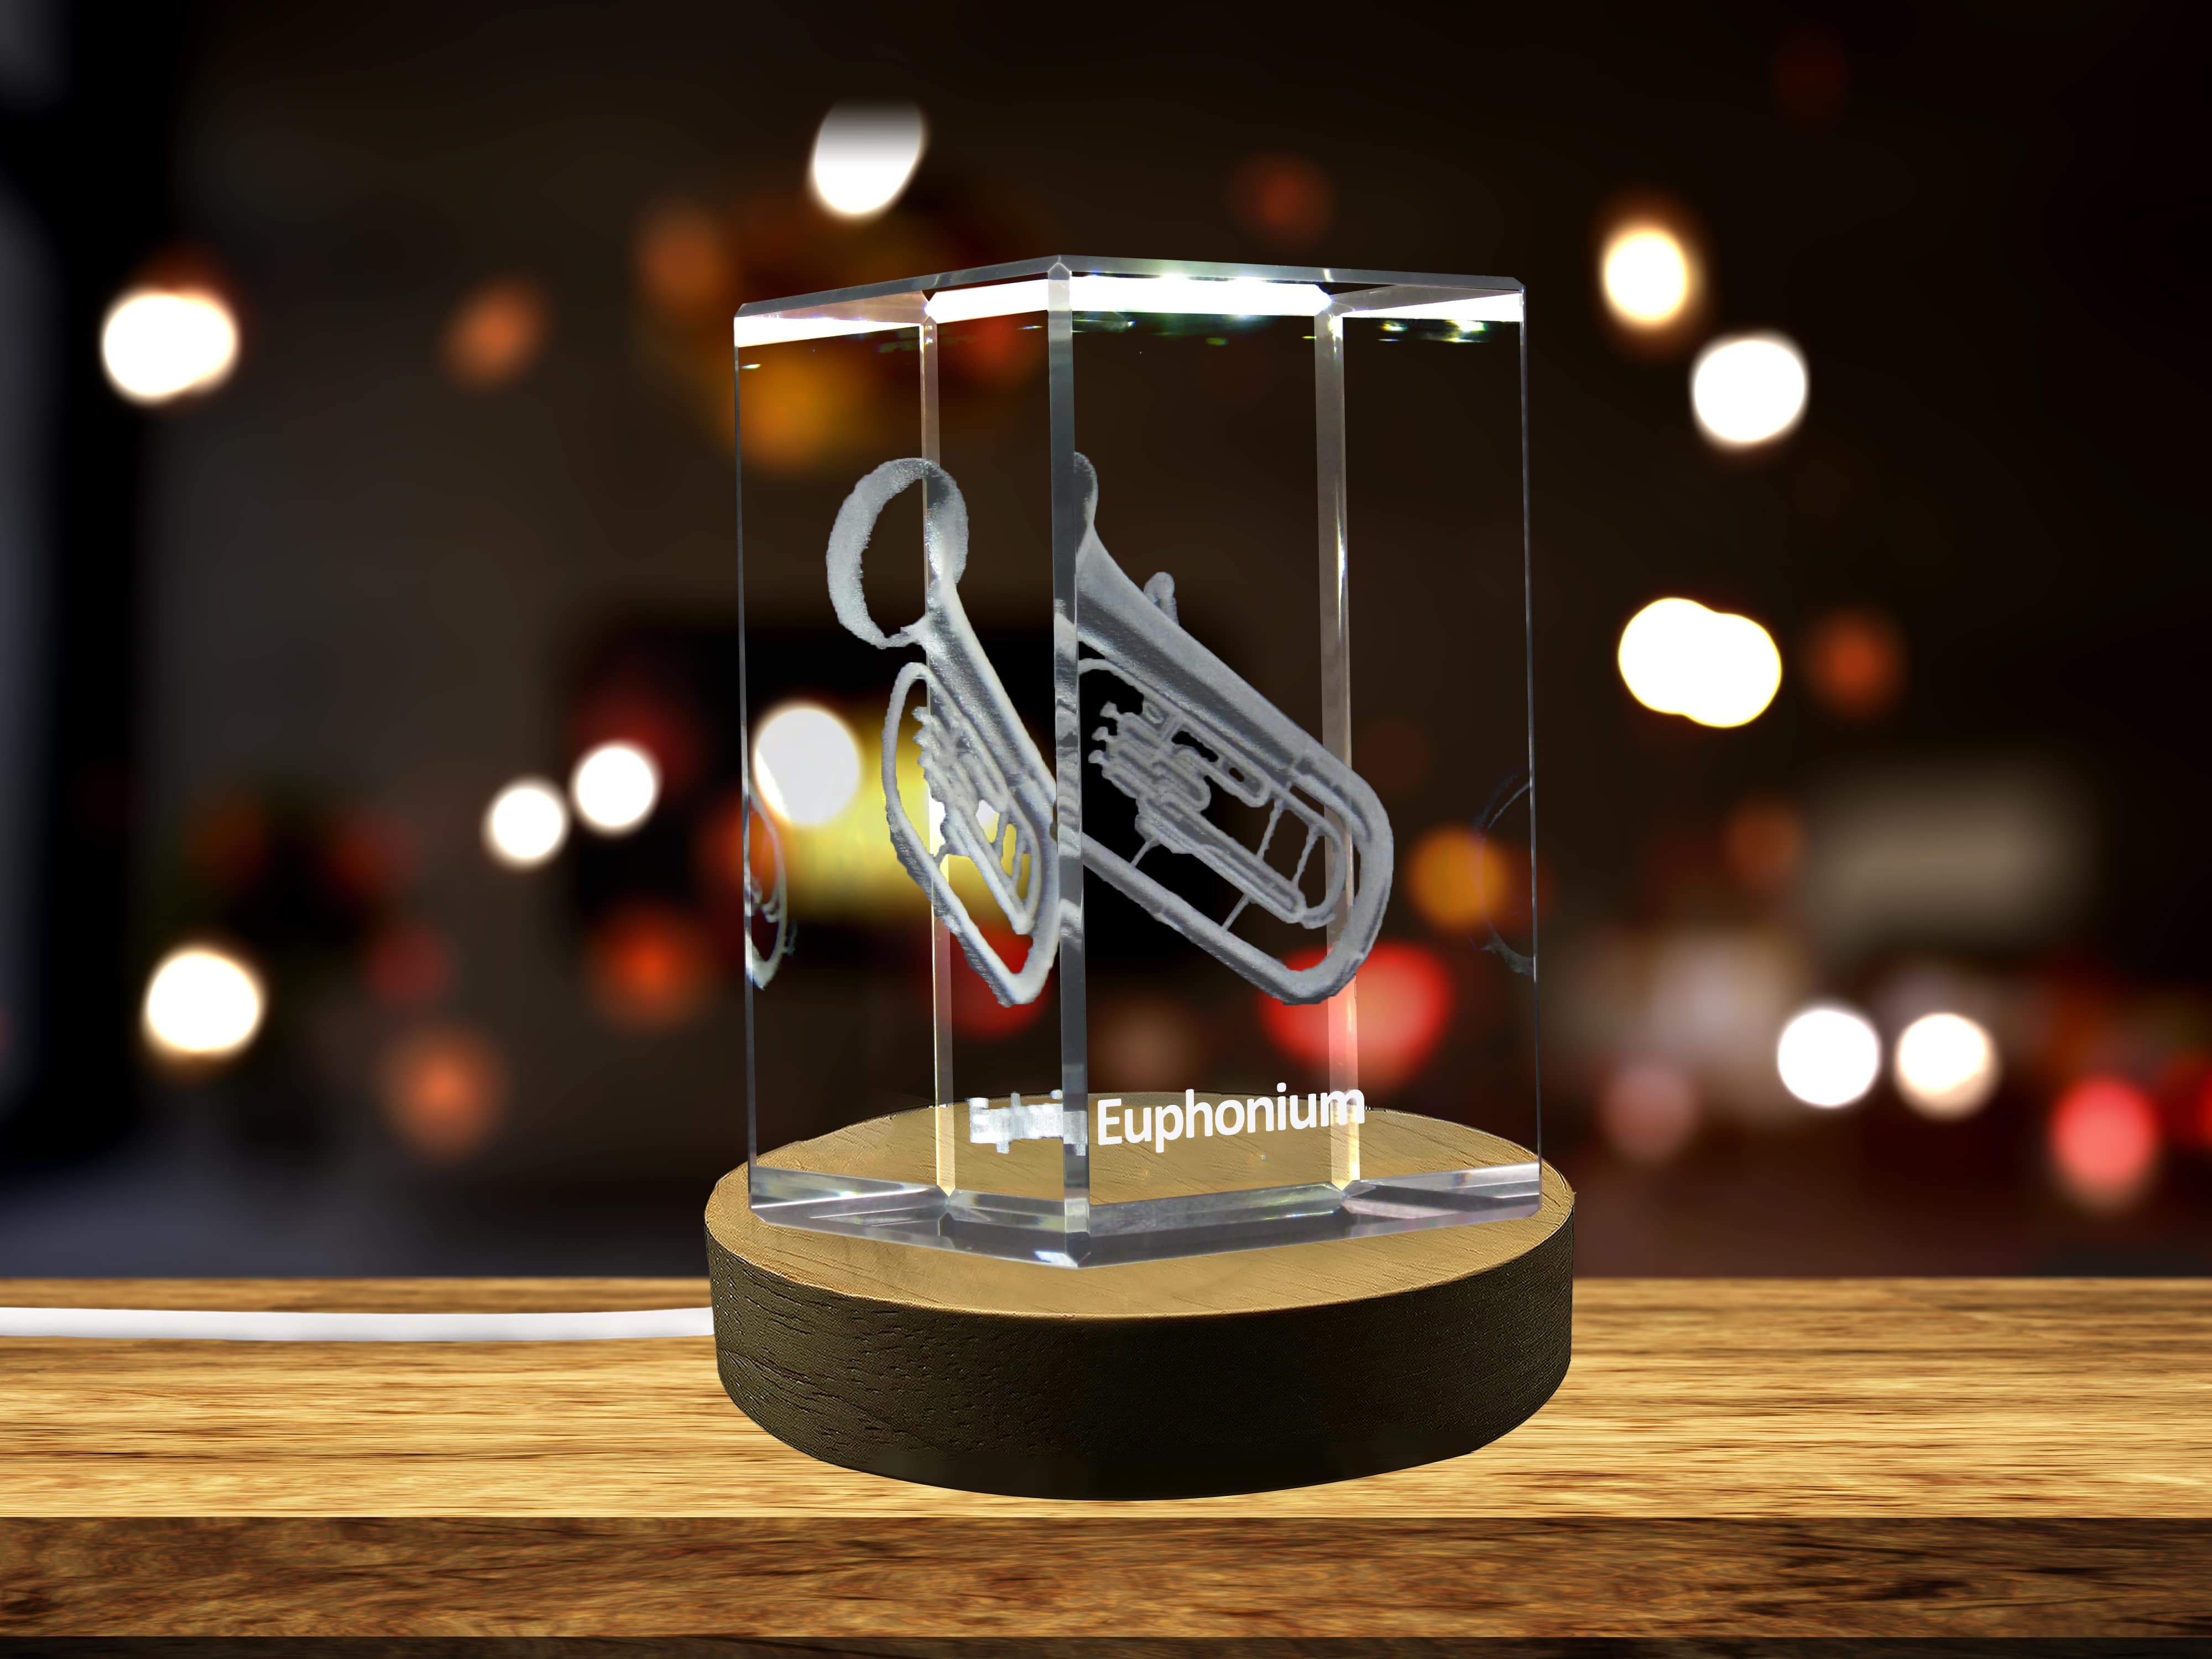 Euphonium 3D Engraved Crystal | Music 3D Engraved Crystal Keepsake A&B Crystal Collection